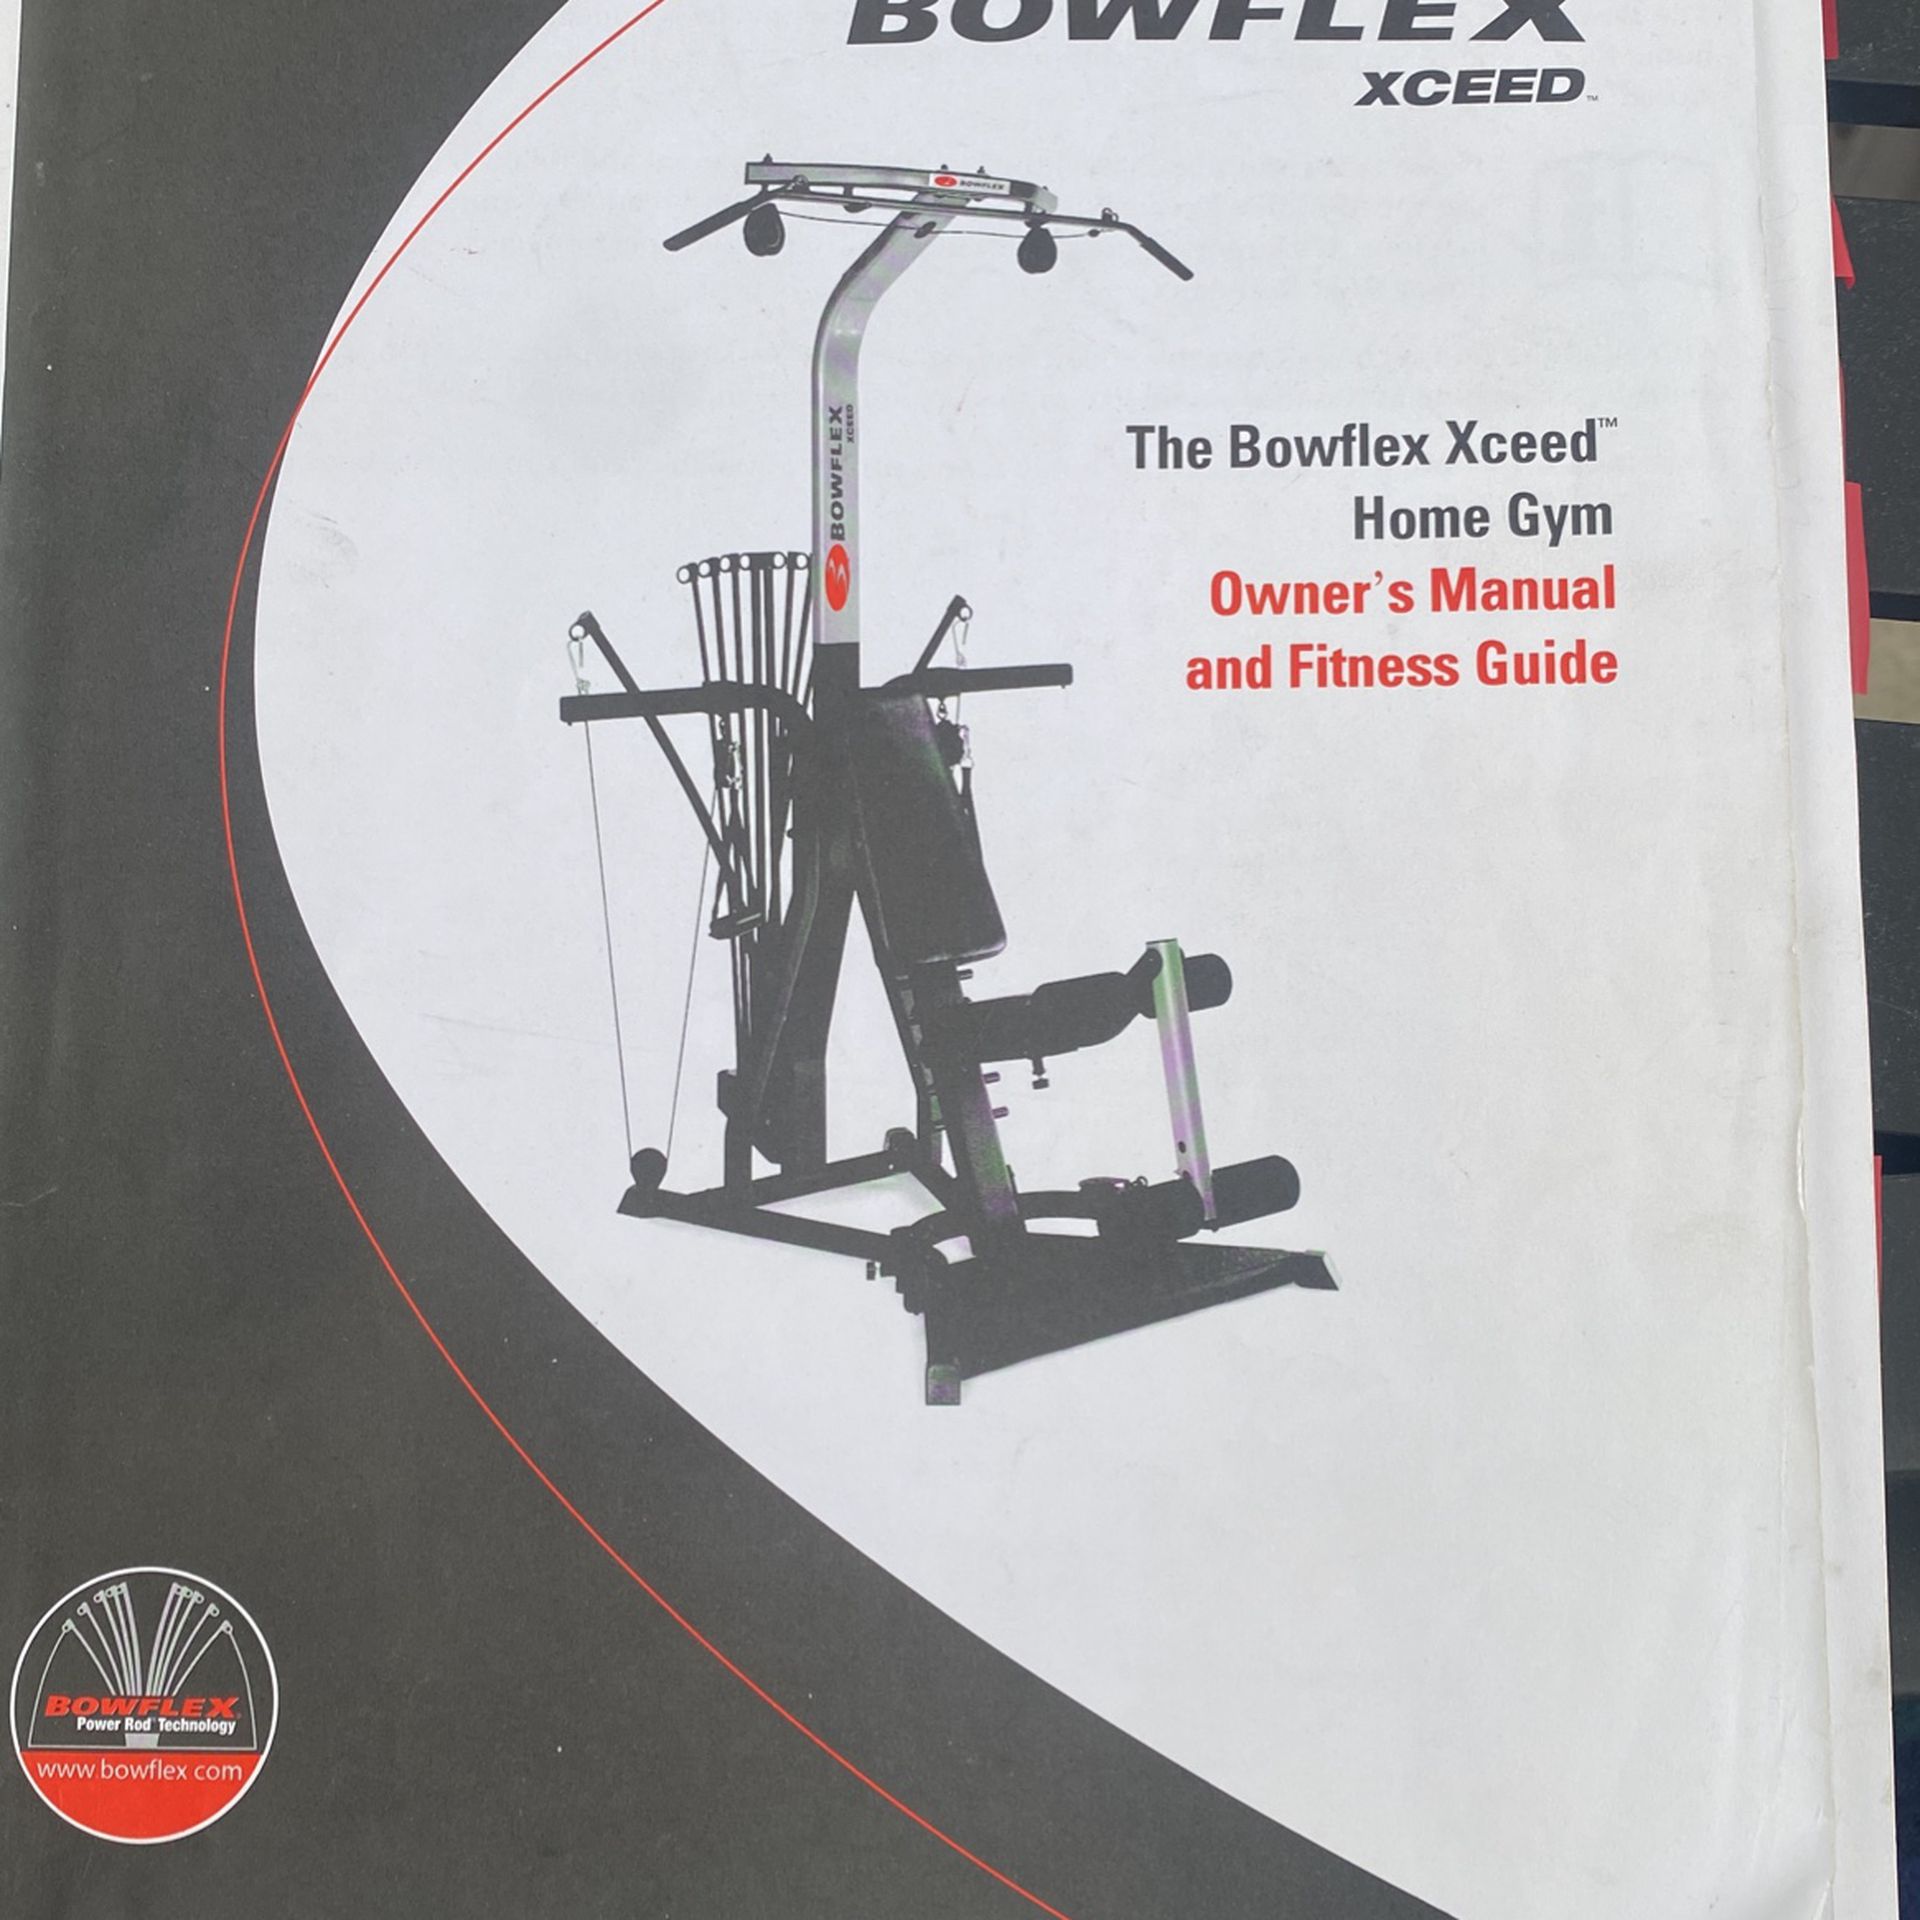 Bow flex XCEED Exercise System For Sale